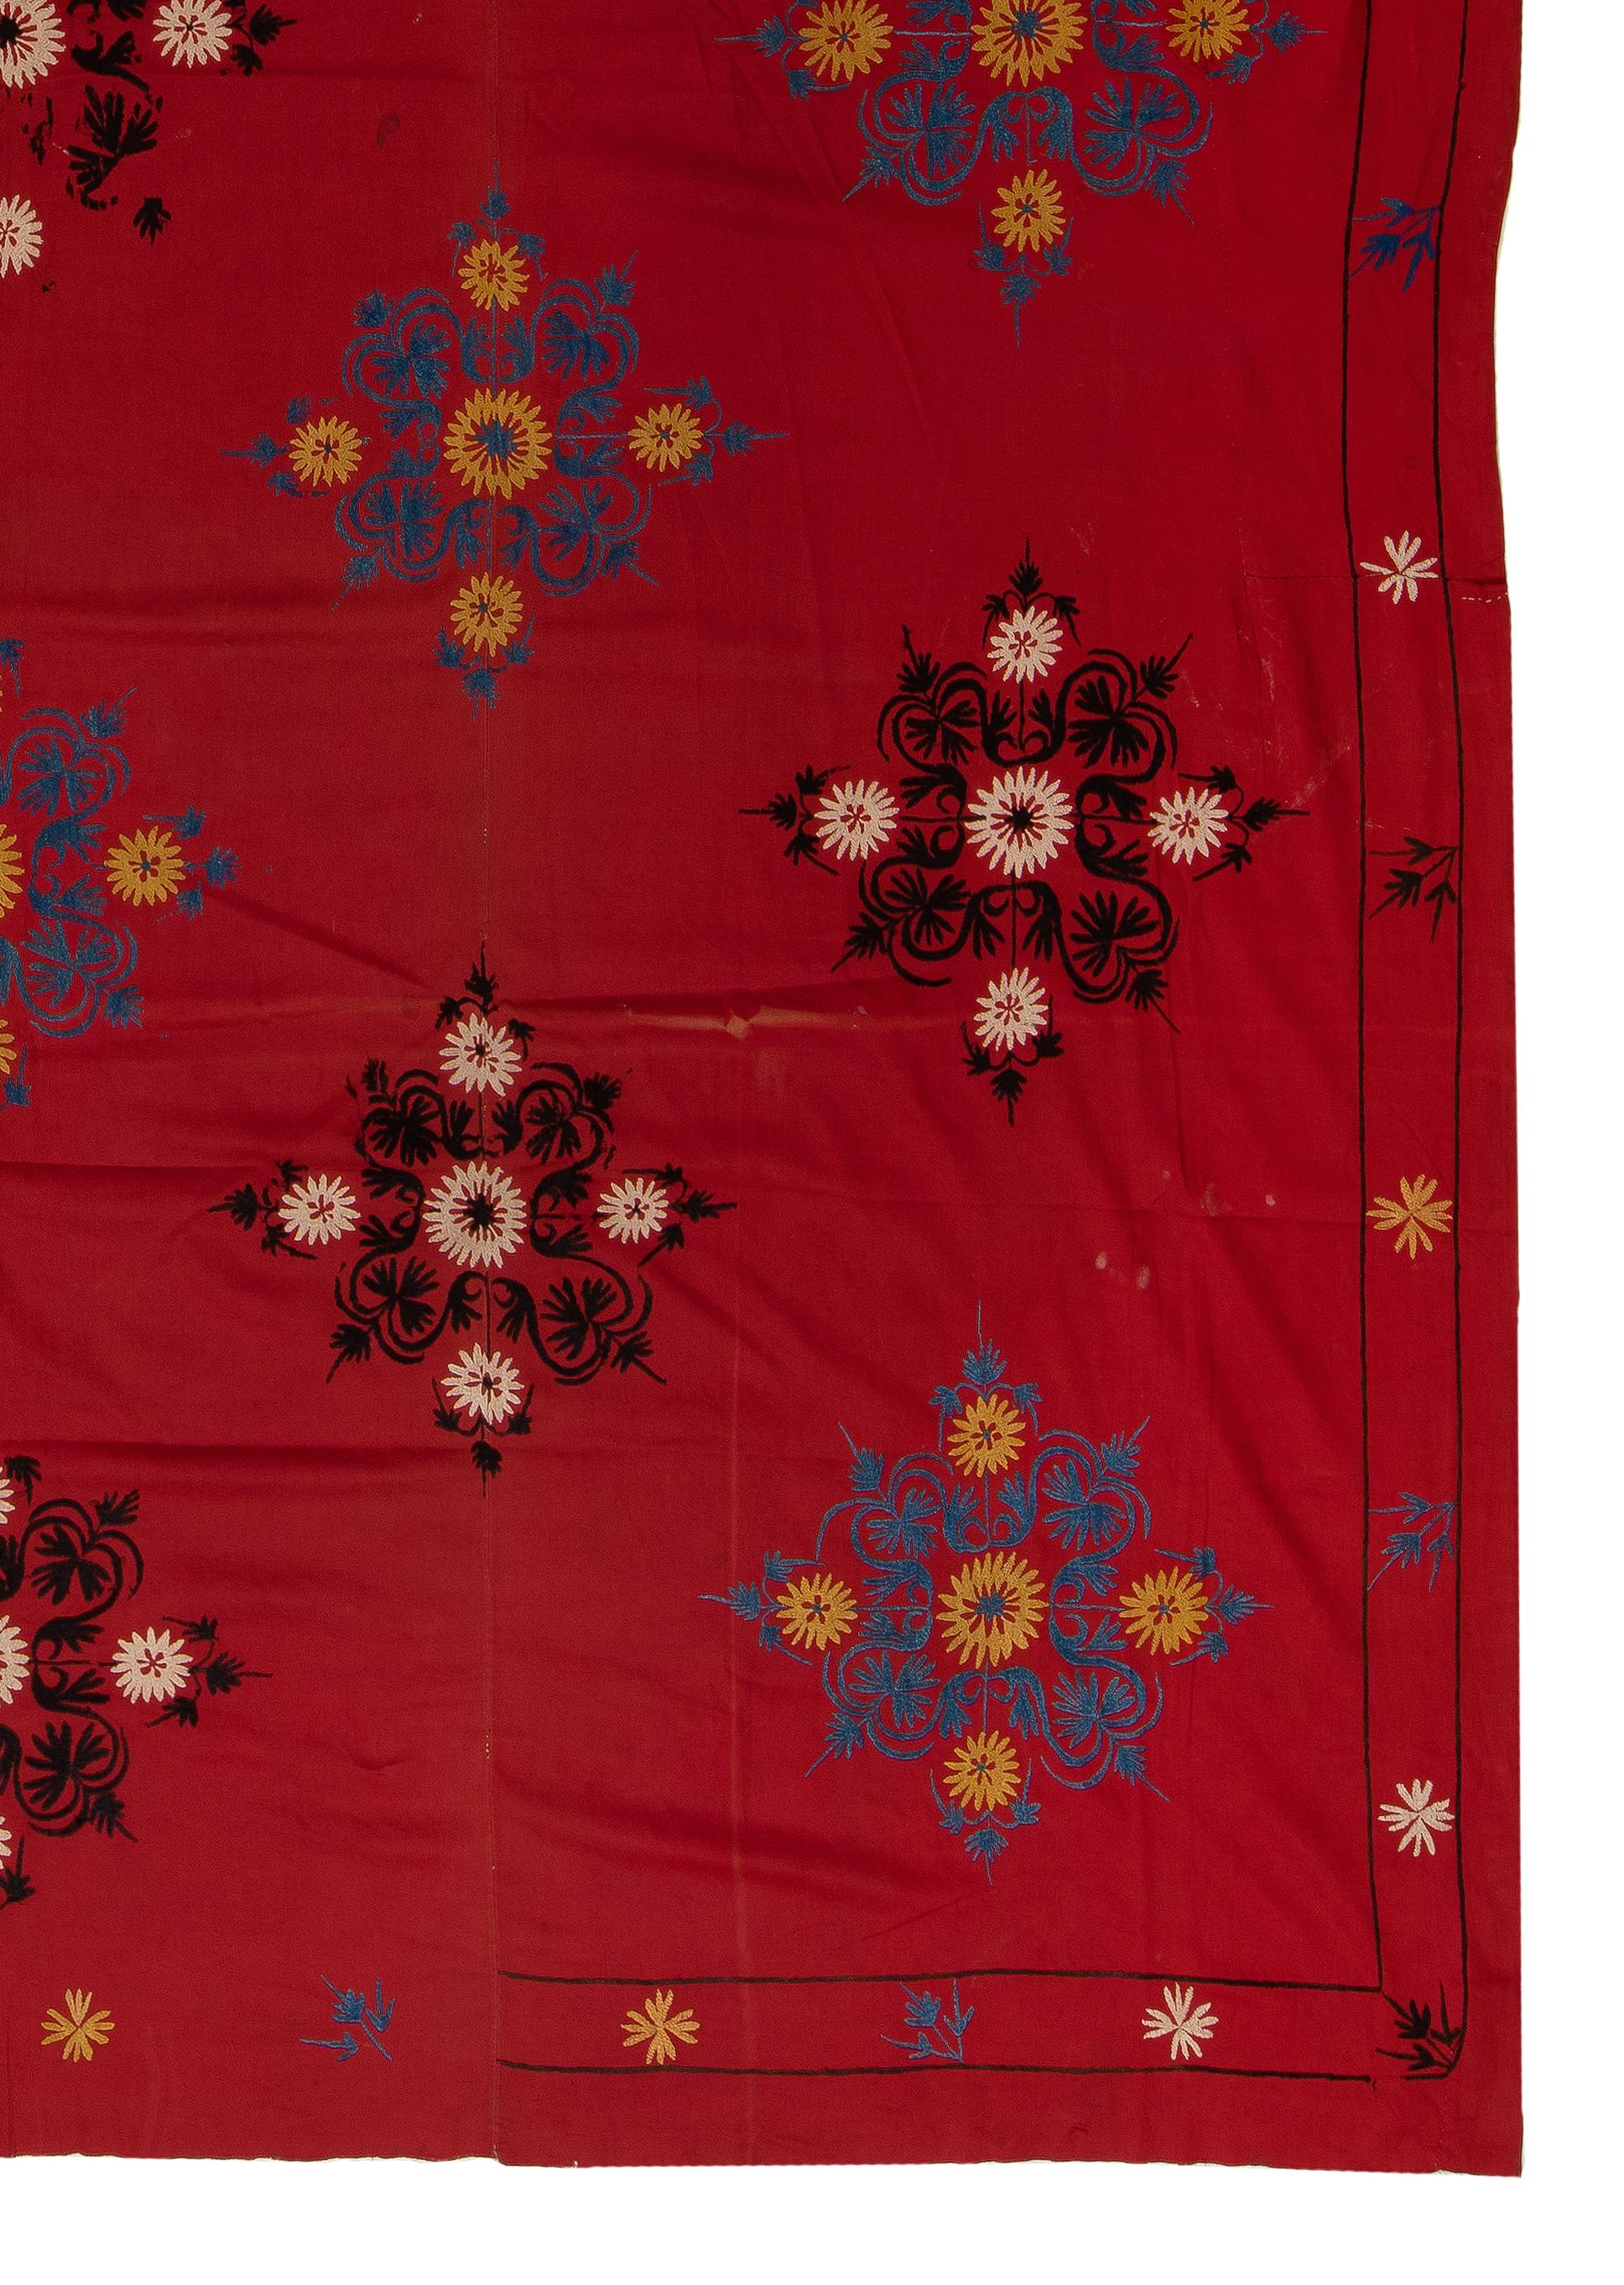 Cotton 6.7x8.7 Ft Hand Embroidered Silk Wall Hanging, Red Bedspread, Suzani Tablecloth For Sale